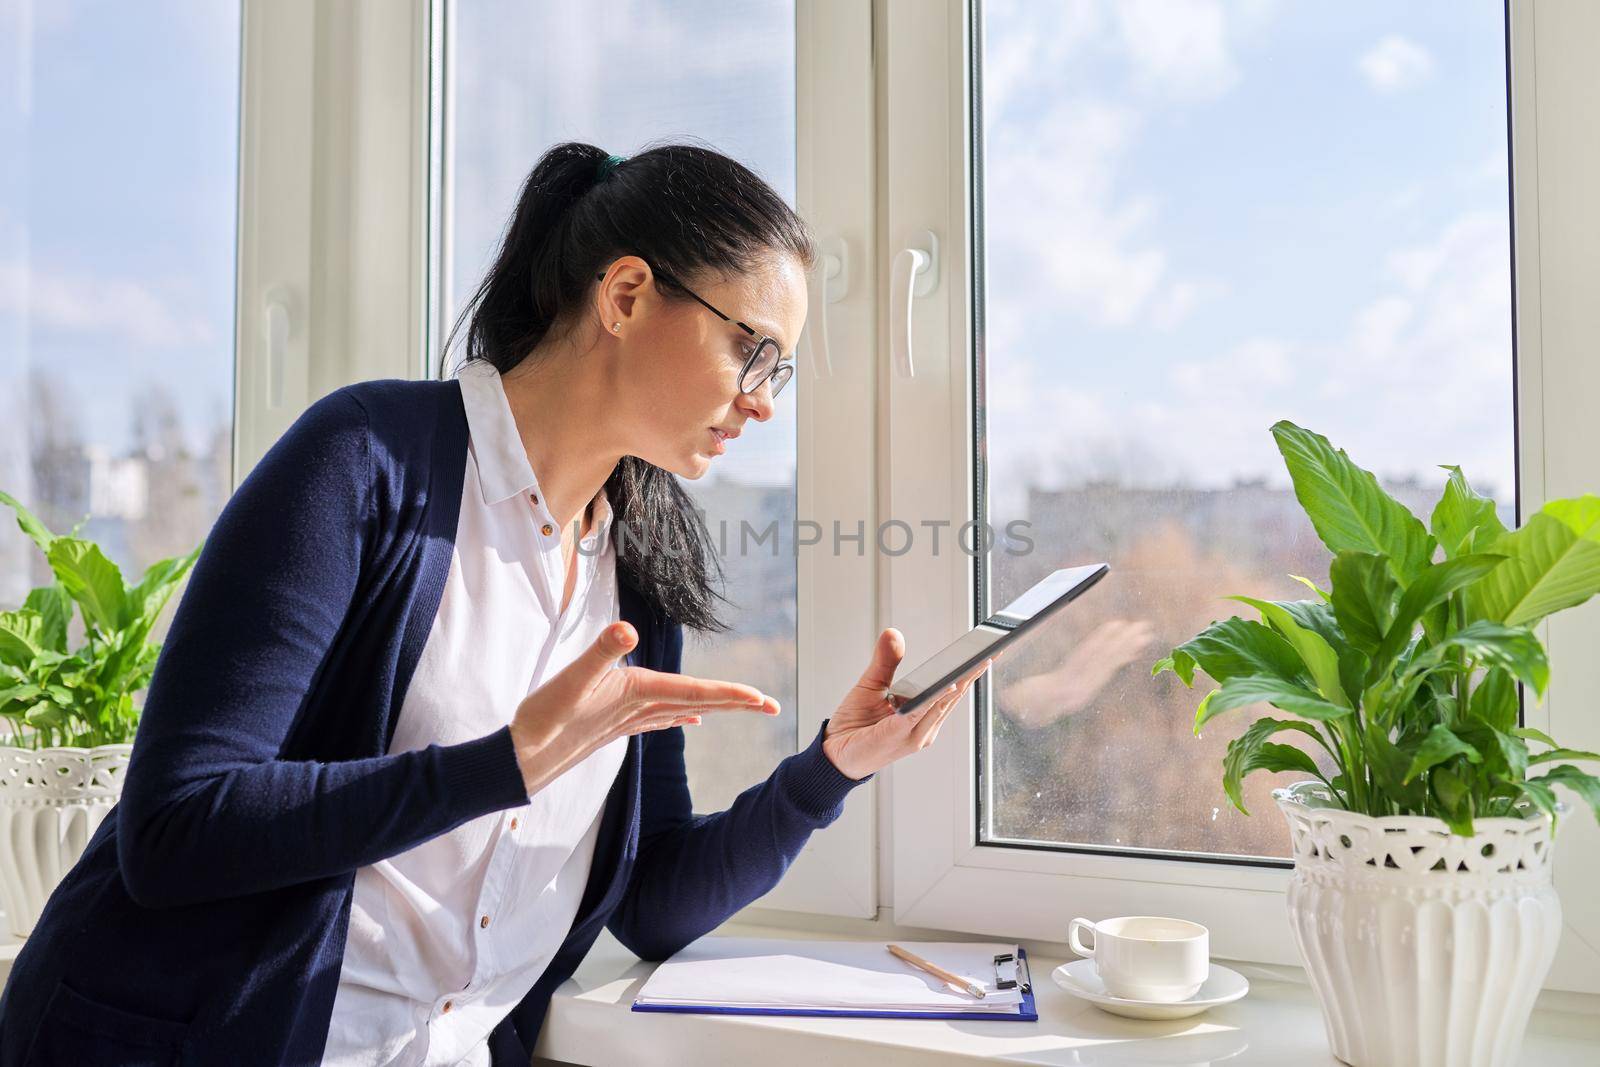 Serious business woman working remotely in her home office, talking on video call, using digital tablet. Freelance, technology, telecommunications, business remotely, video communication near window